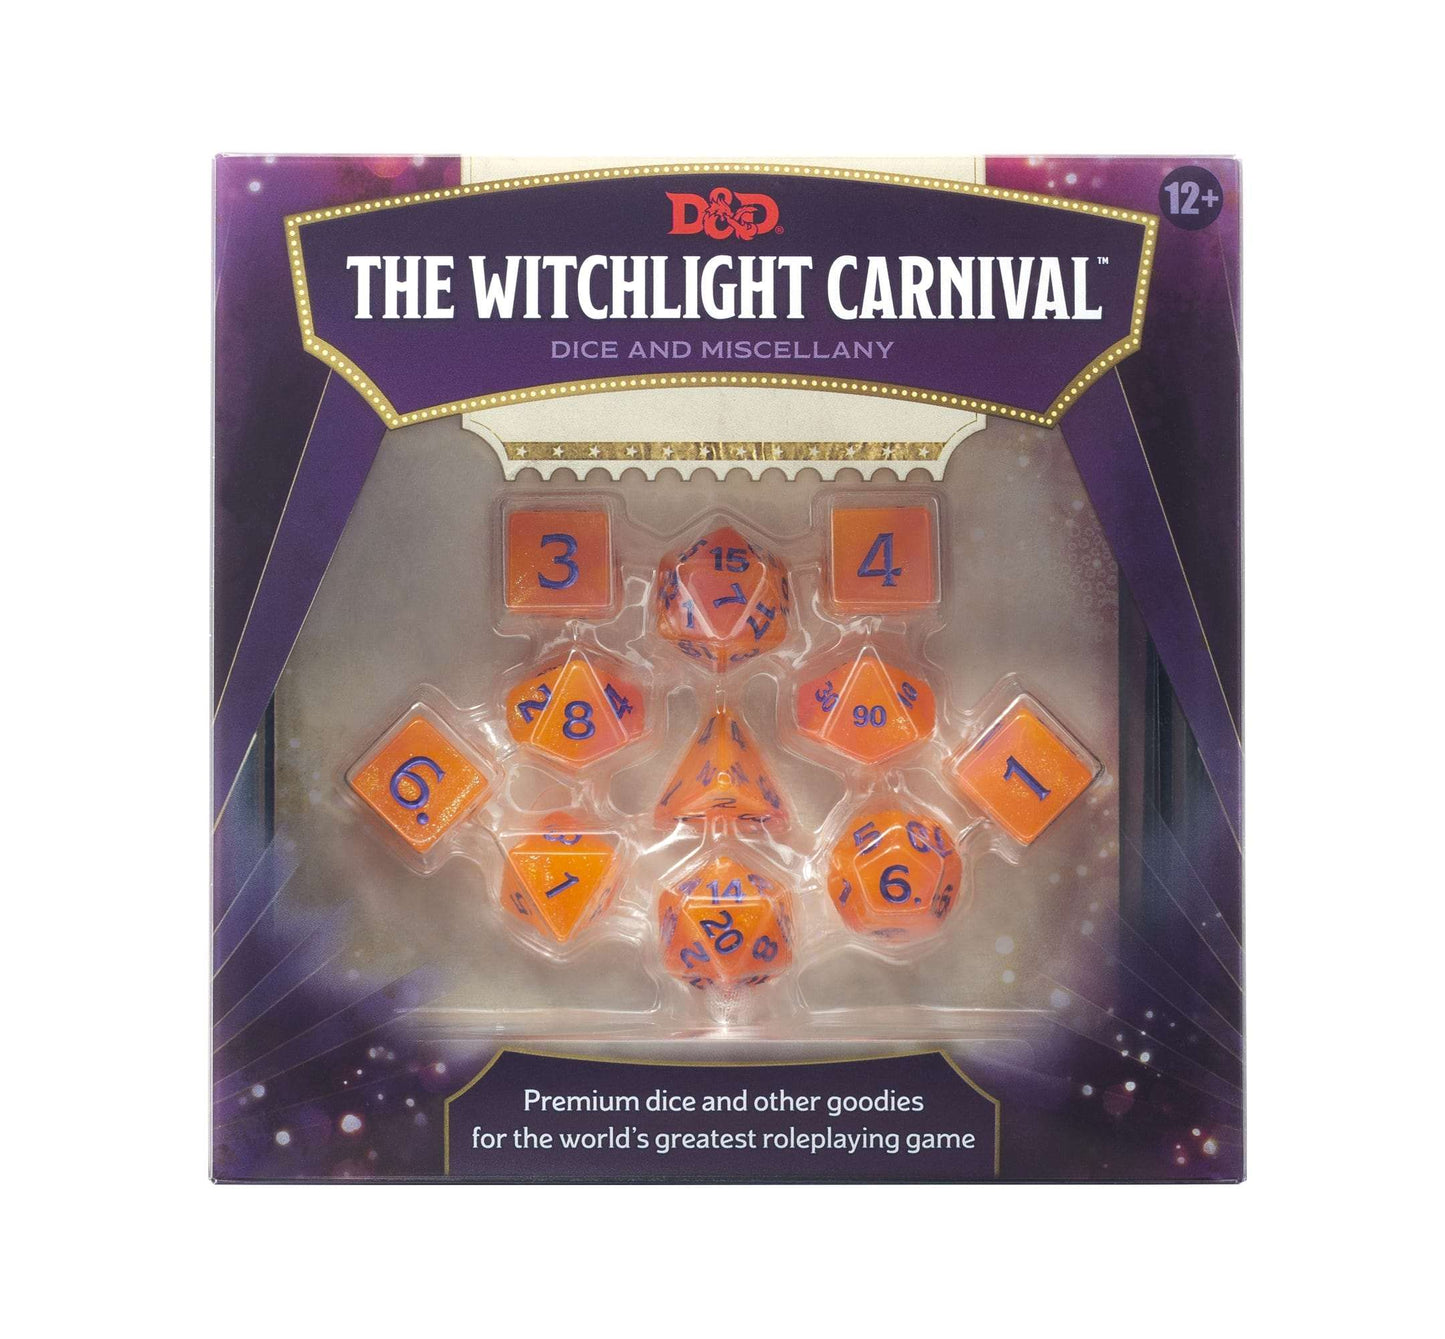 Dungeons & Dragons: The Witchlight Carnival Dice and Miscellany, Wizards of the Coast, Dice Game, 9780786967216, DICE, DICE SET, Dungeons & Dragons, RPG, Dark Ninja Gaming LA